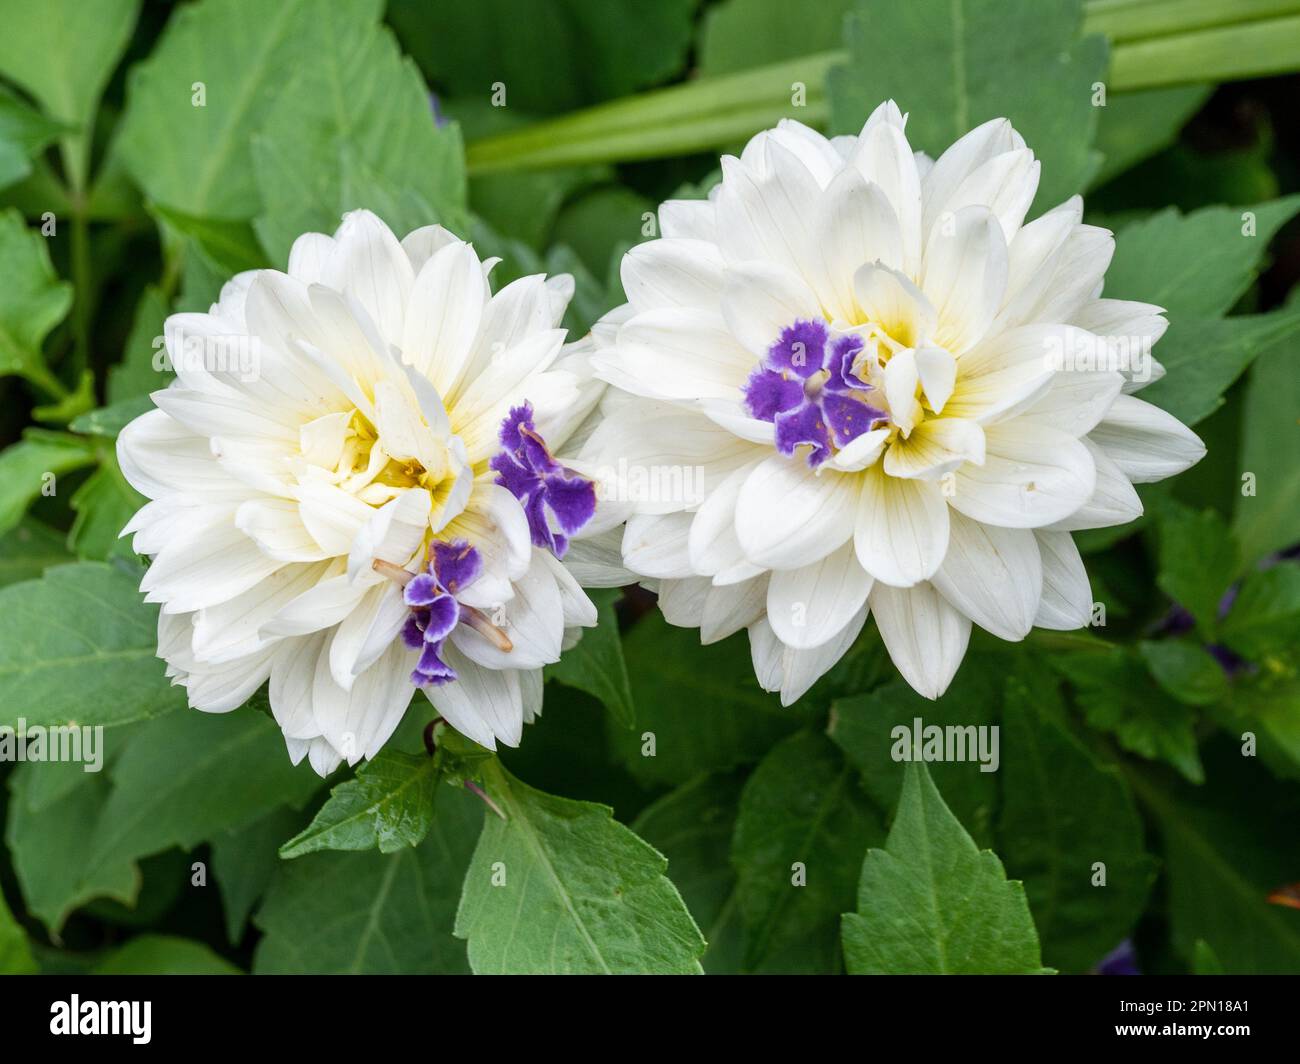 Two White Dahlia flowers dotted with purple flowers from a Geisha Girl Plant, Australian garden Stock Photo